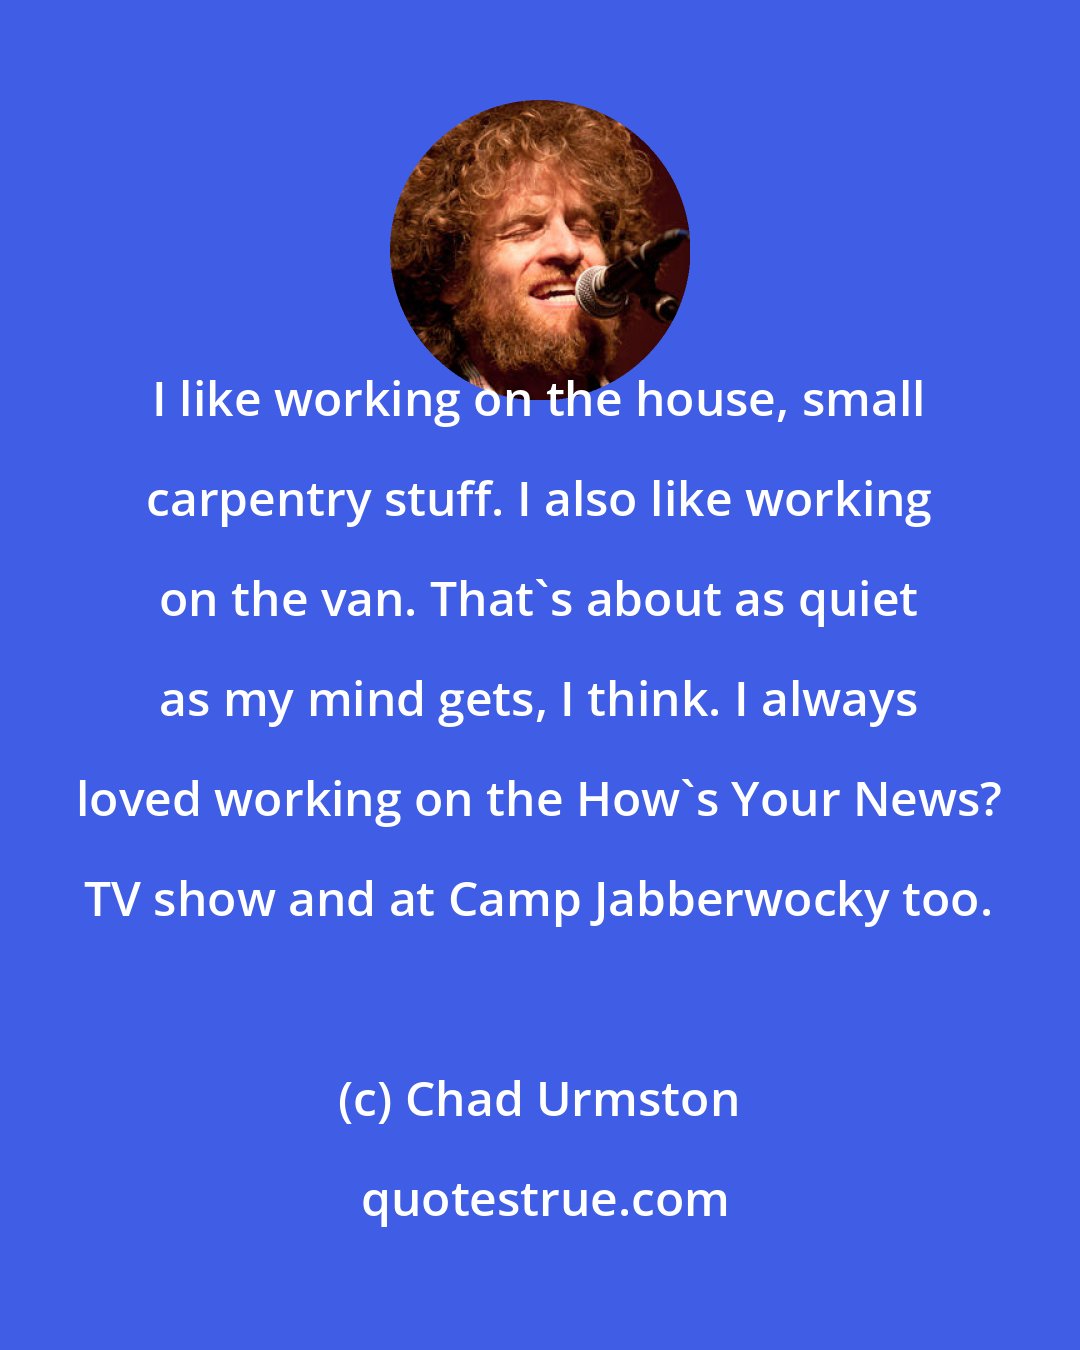 Chad Urmston: I like working on the house, small carpentry stuff. I also like working on the van. That's about as quiet as my mind gets, I think. I always loved working on the How's Your News? TV show and at Camp Jabberwocky too.